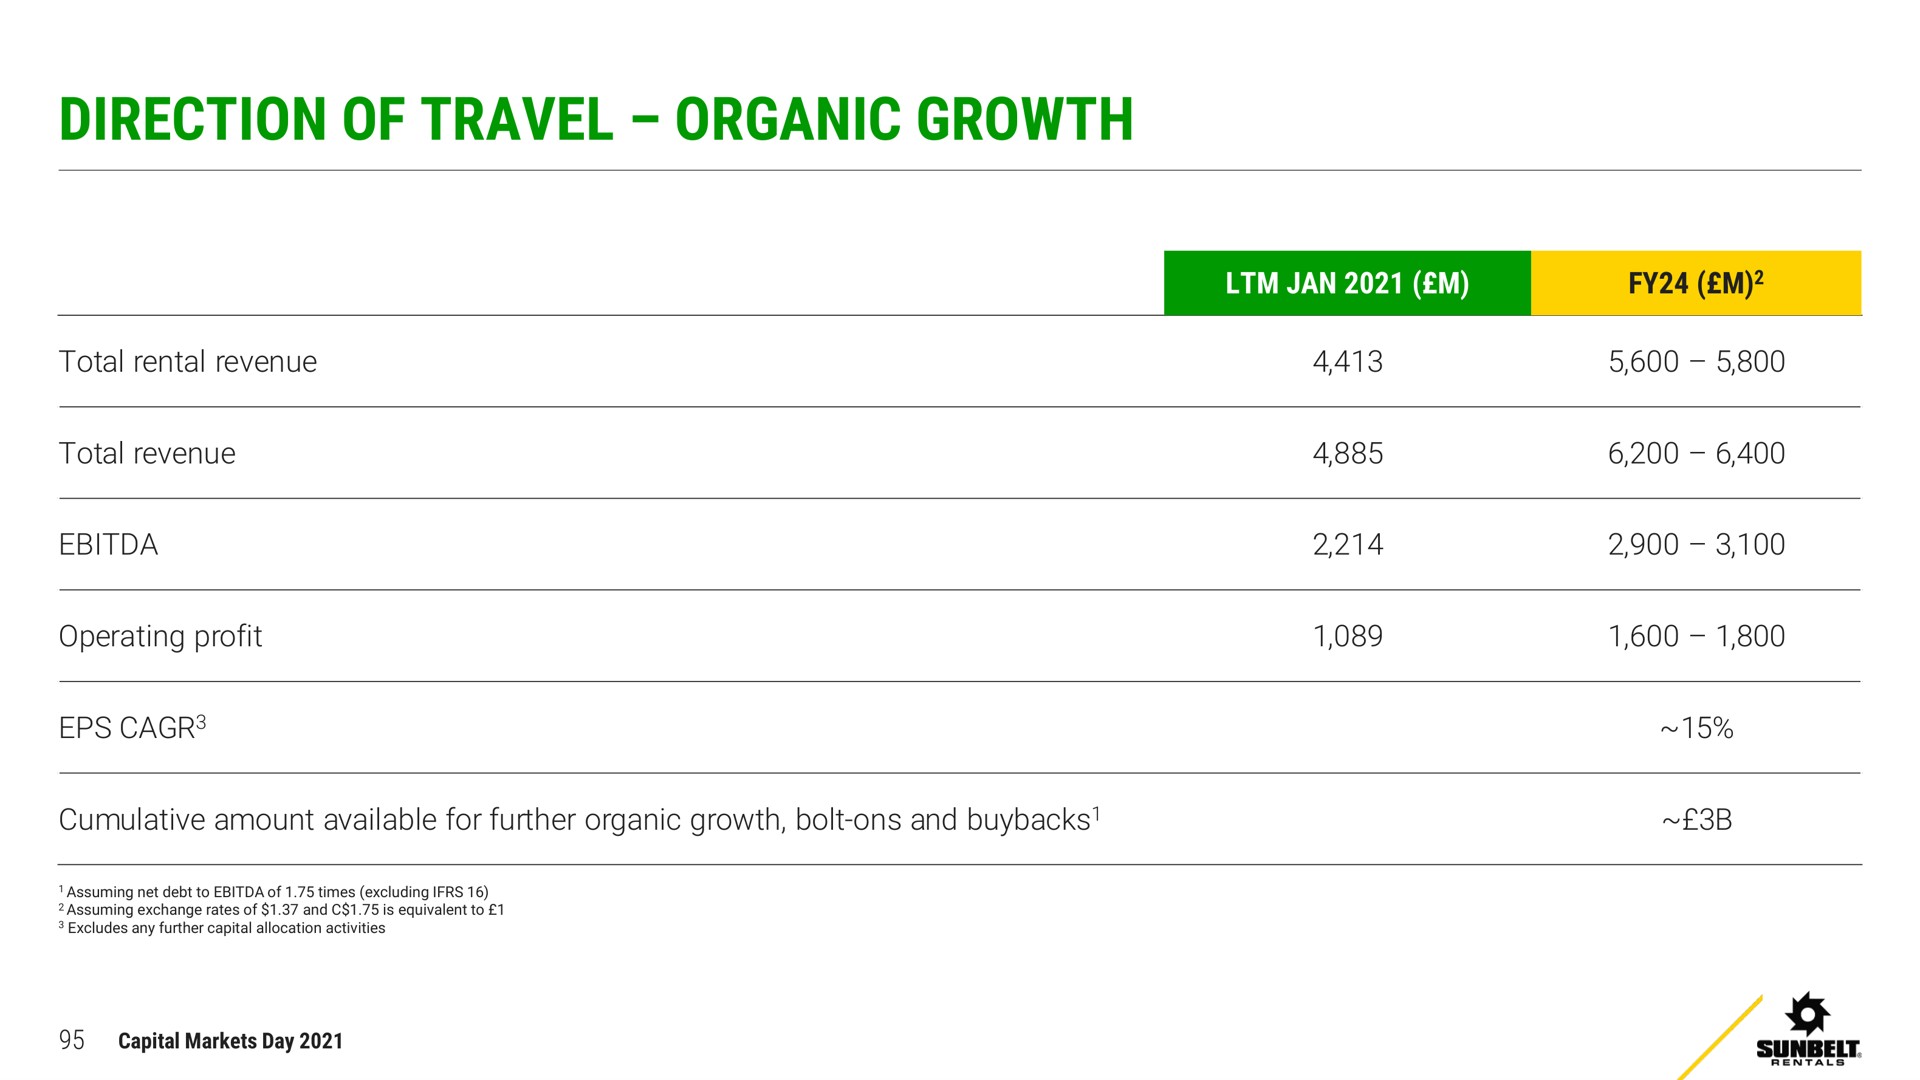 direction of travel organic growth | Ashtead Group